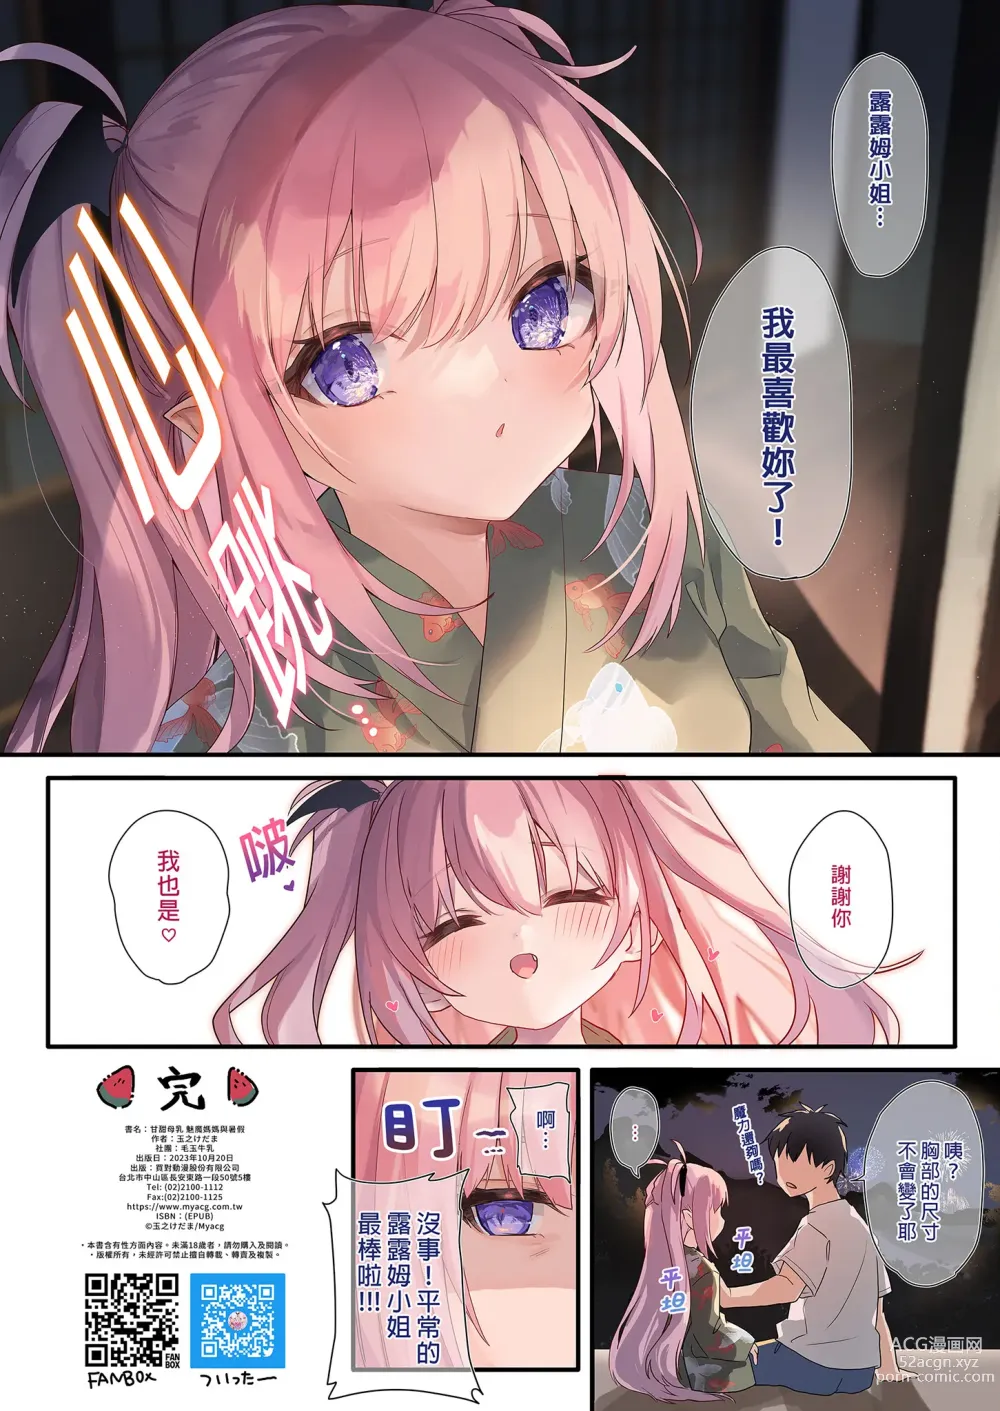 Page 34 of doujinshi 甘甜母乳 魅魔媽媽與暑假 (decensored)